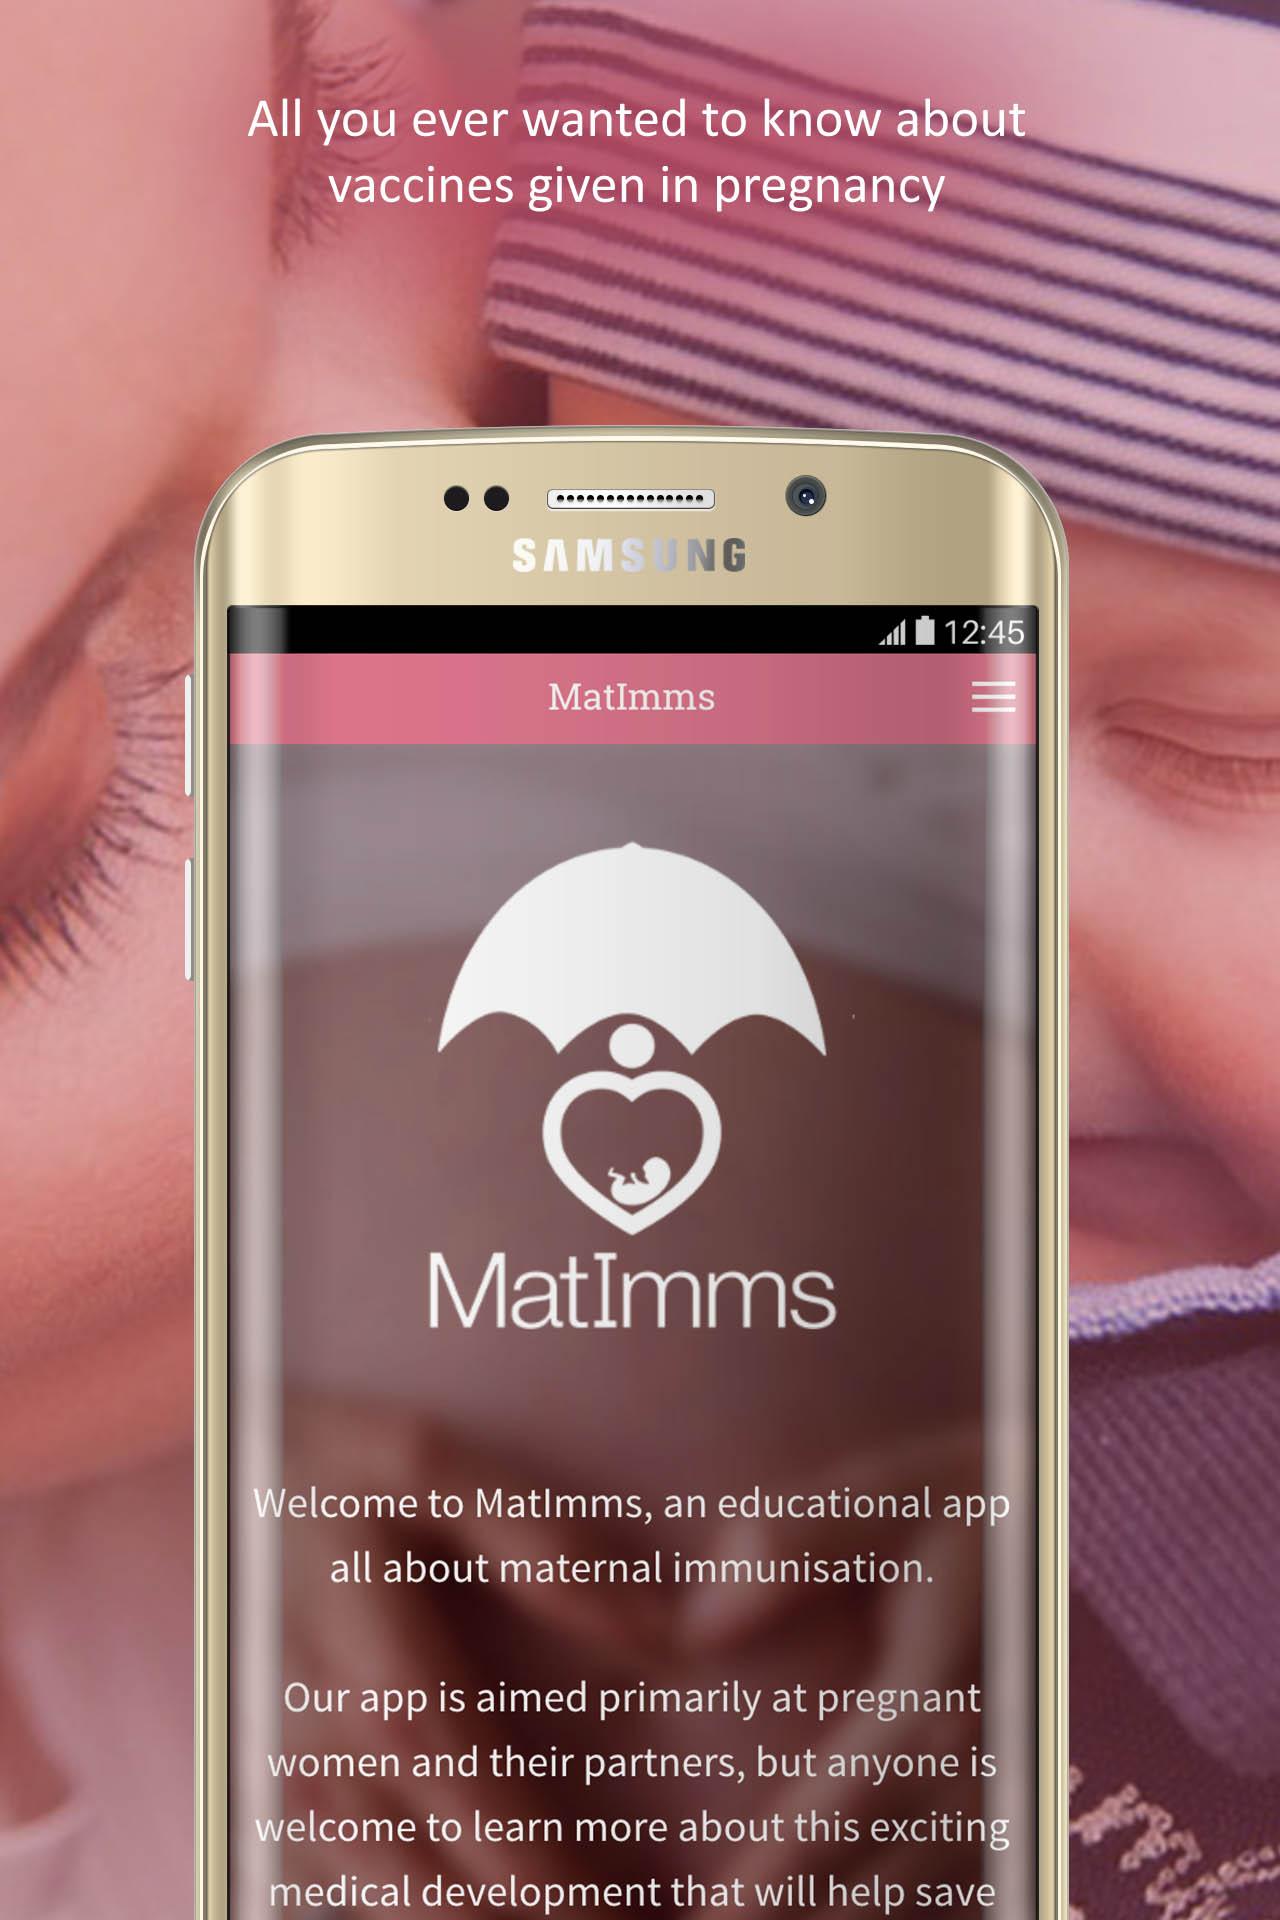 Android application Vaccines in Pregnancy: MatImms screenshort